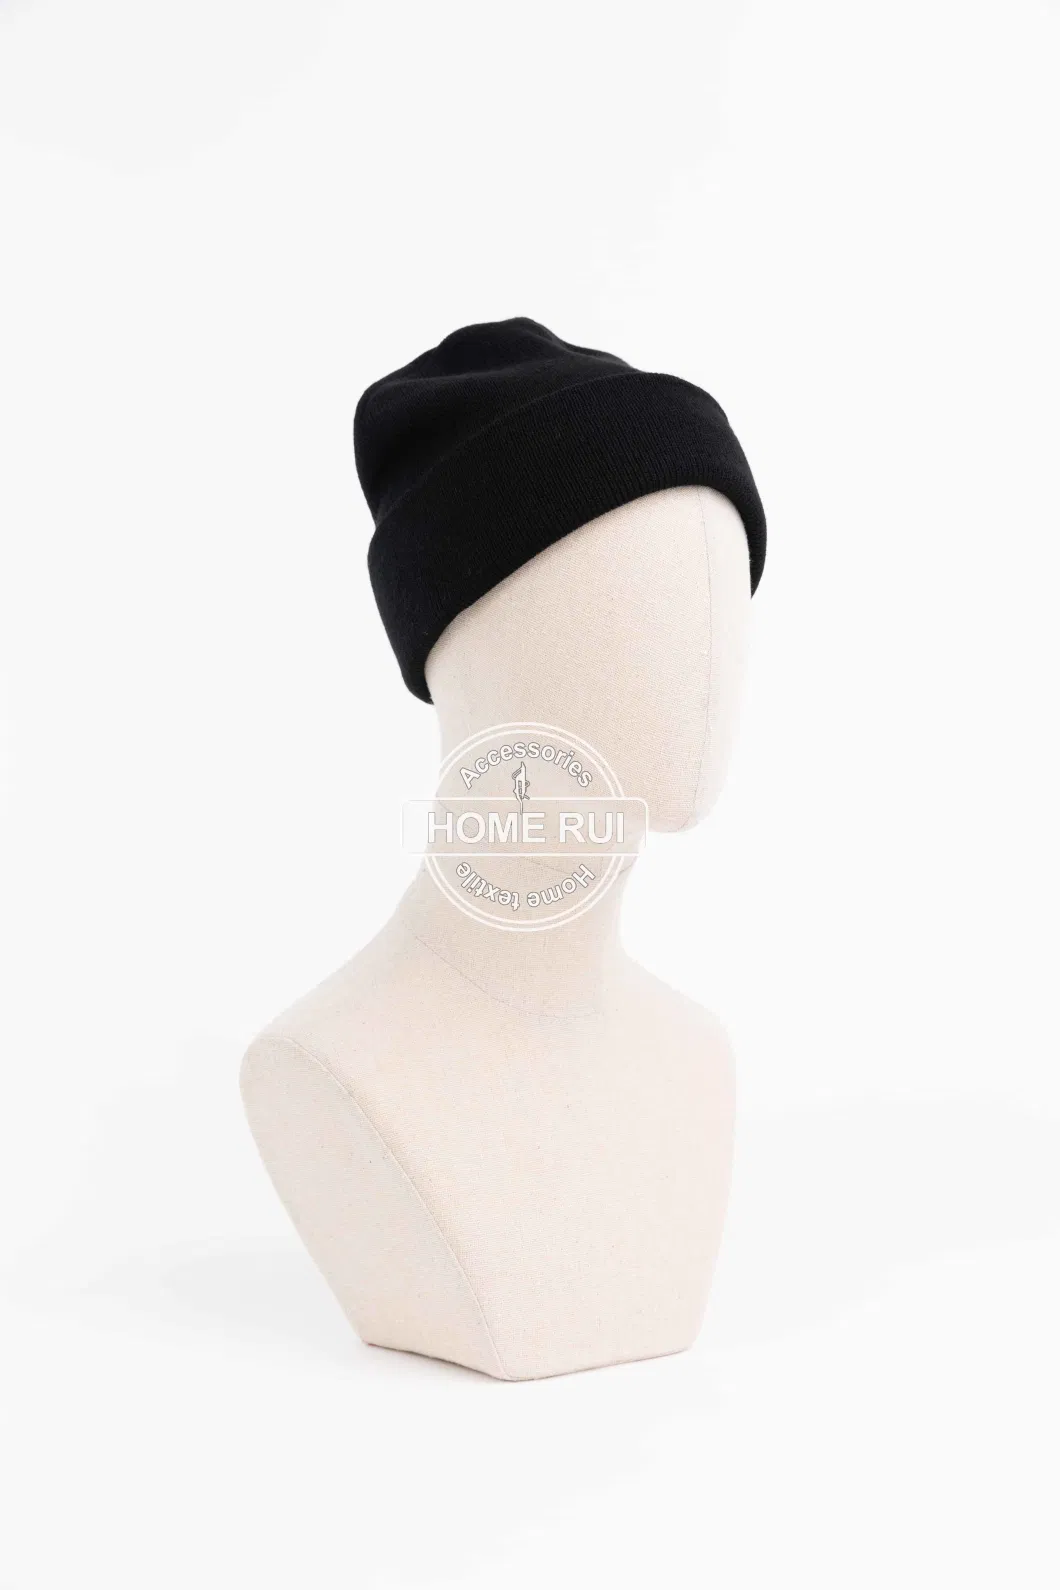 OEM Low MOQ Winter Outdoor Running Riding Cycling Leather Patch Custom Logo Ribbed Knit Skully Beanie Hats